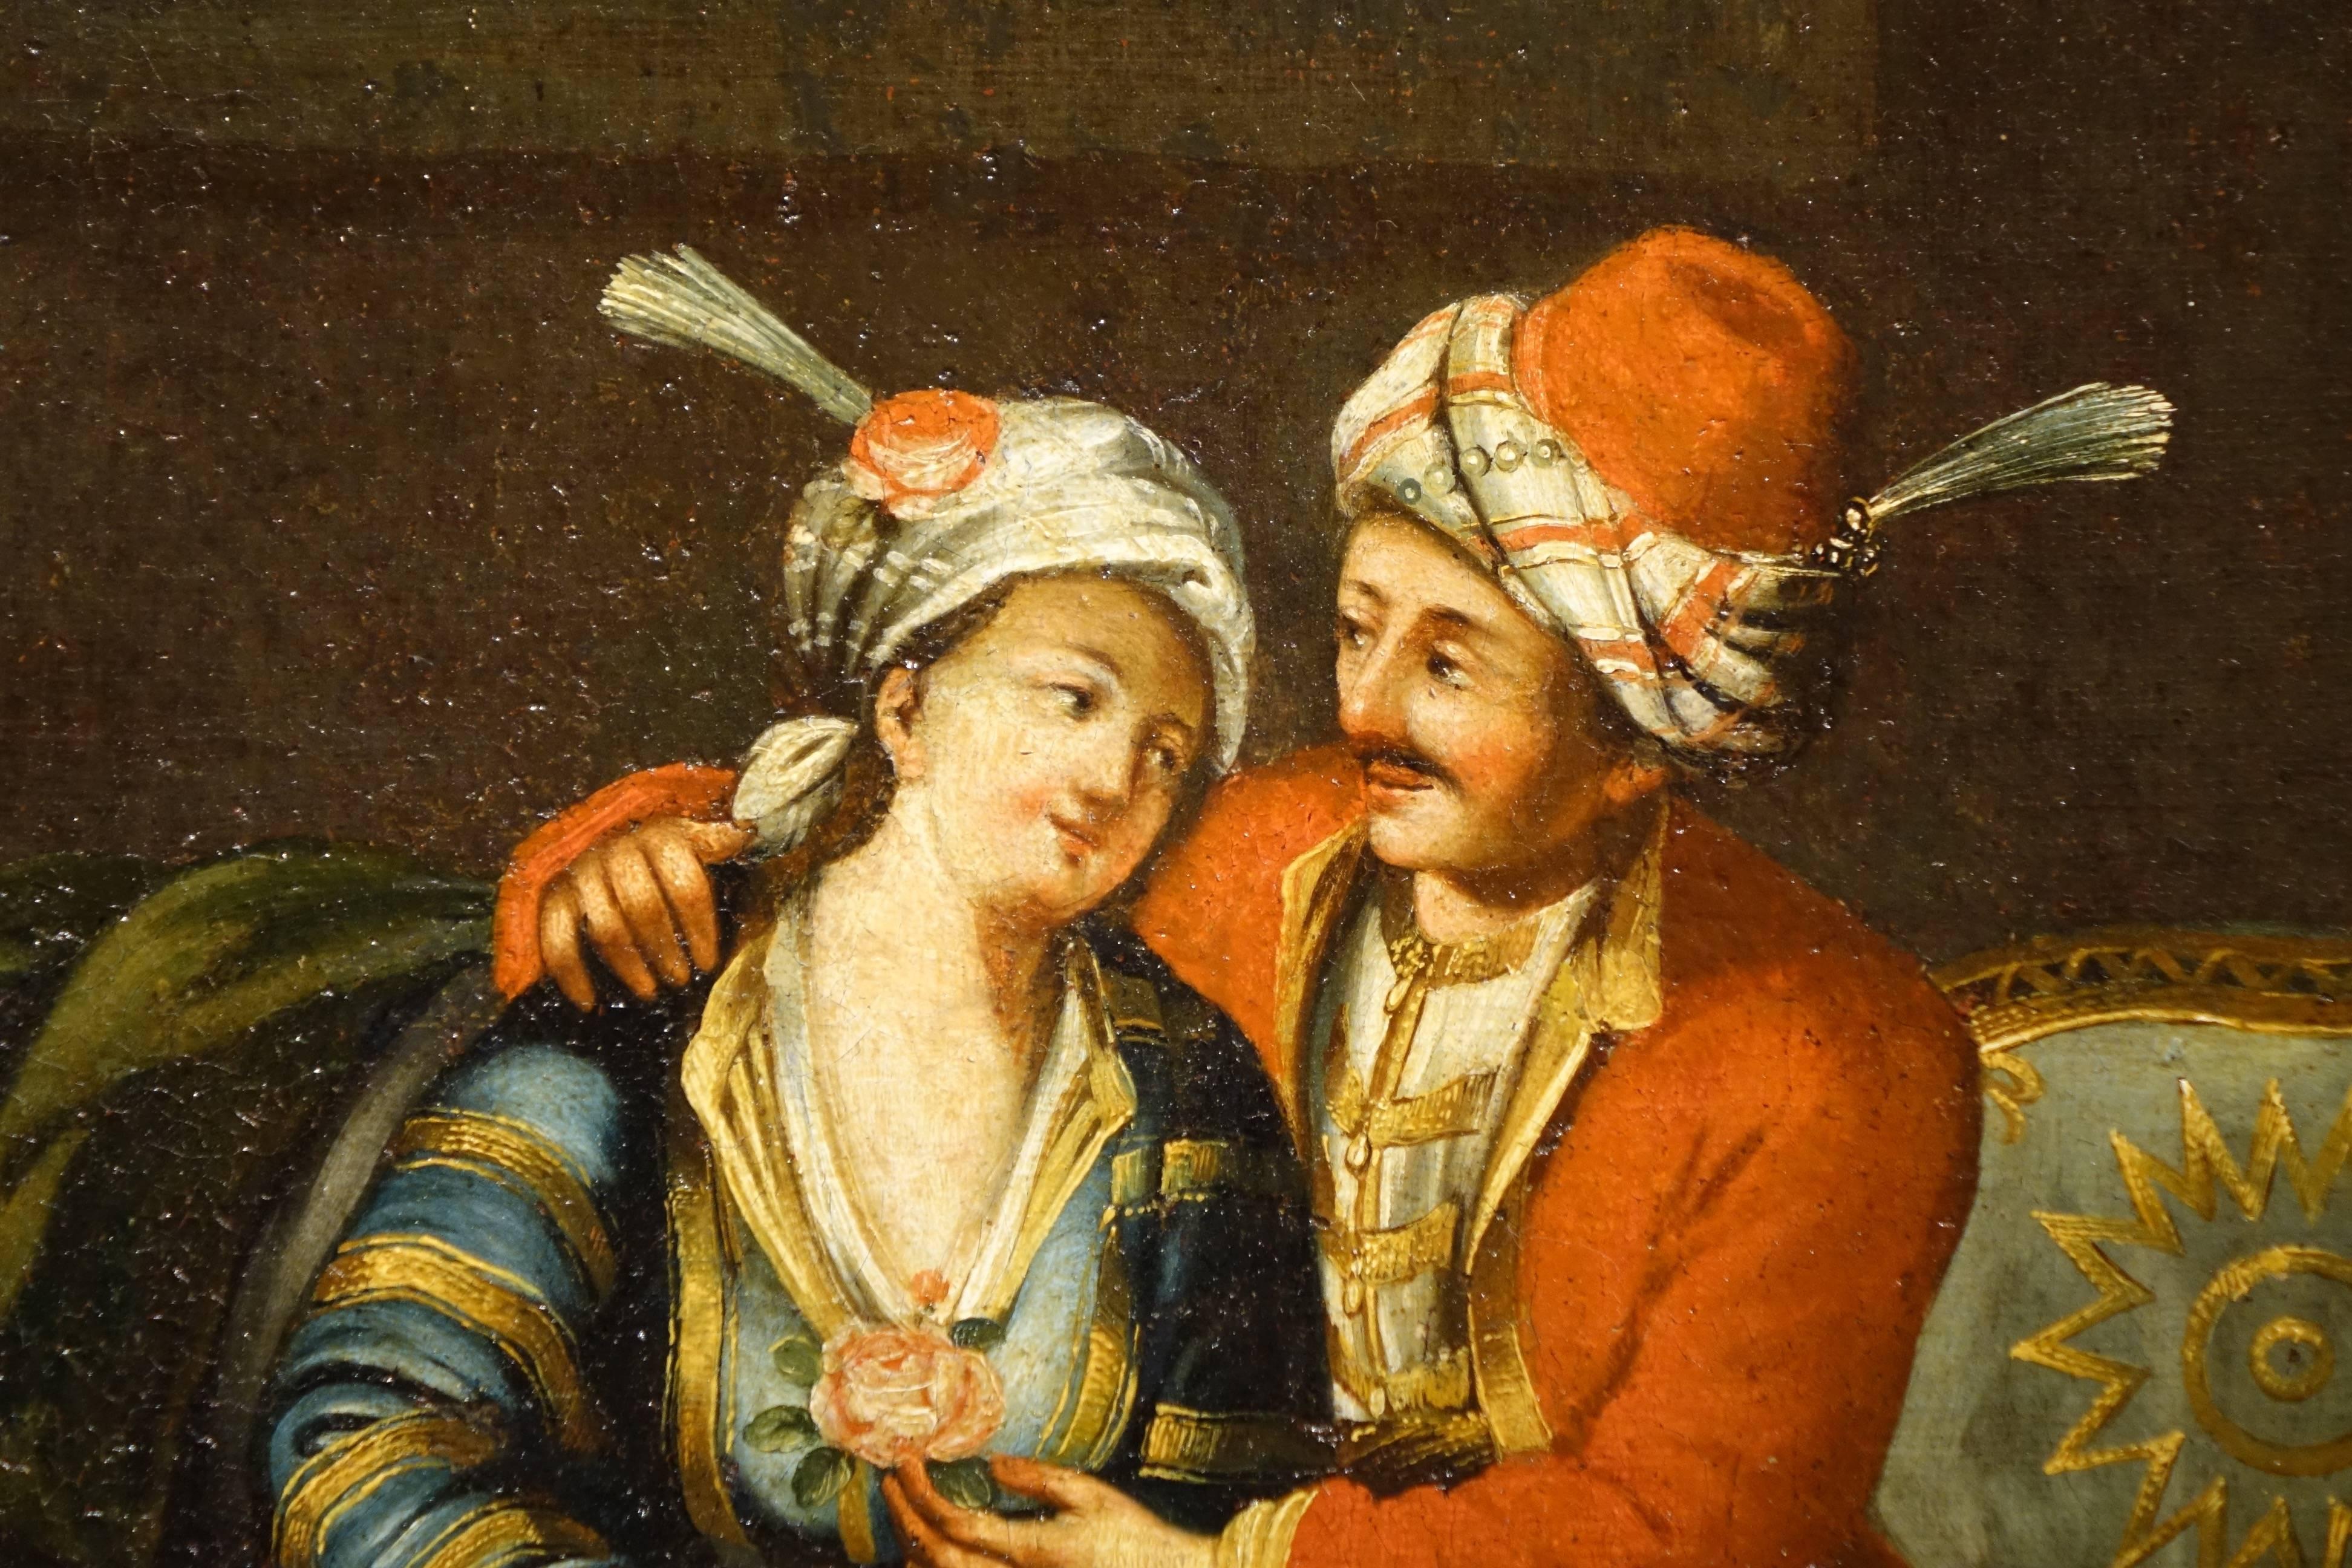  A painting representing a Scene of Courtly Love in an Ottoman interior.
Oil on canvas 
Charming scene of a French Orientalist school from the mid-19th century.
A lord (Pasha or general) offers a rose to a young woman in an interior decorated with